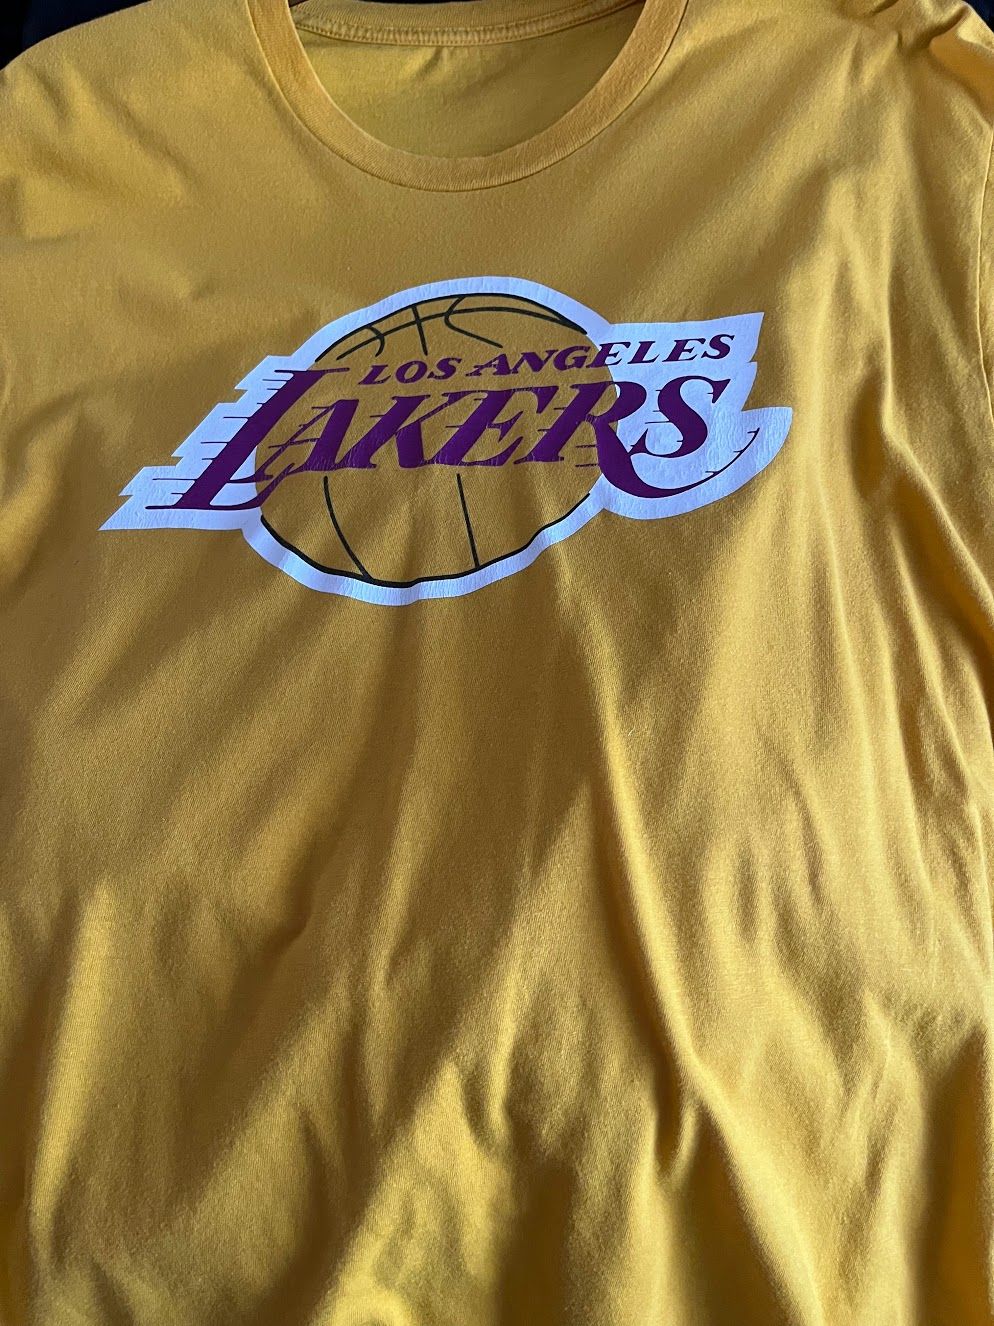 LA Lakers t-shirt in yellow/gold